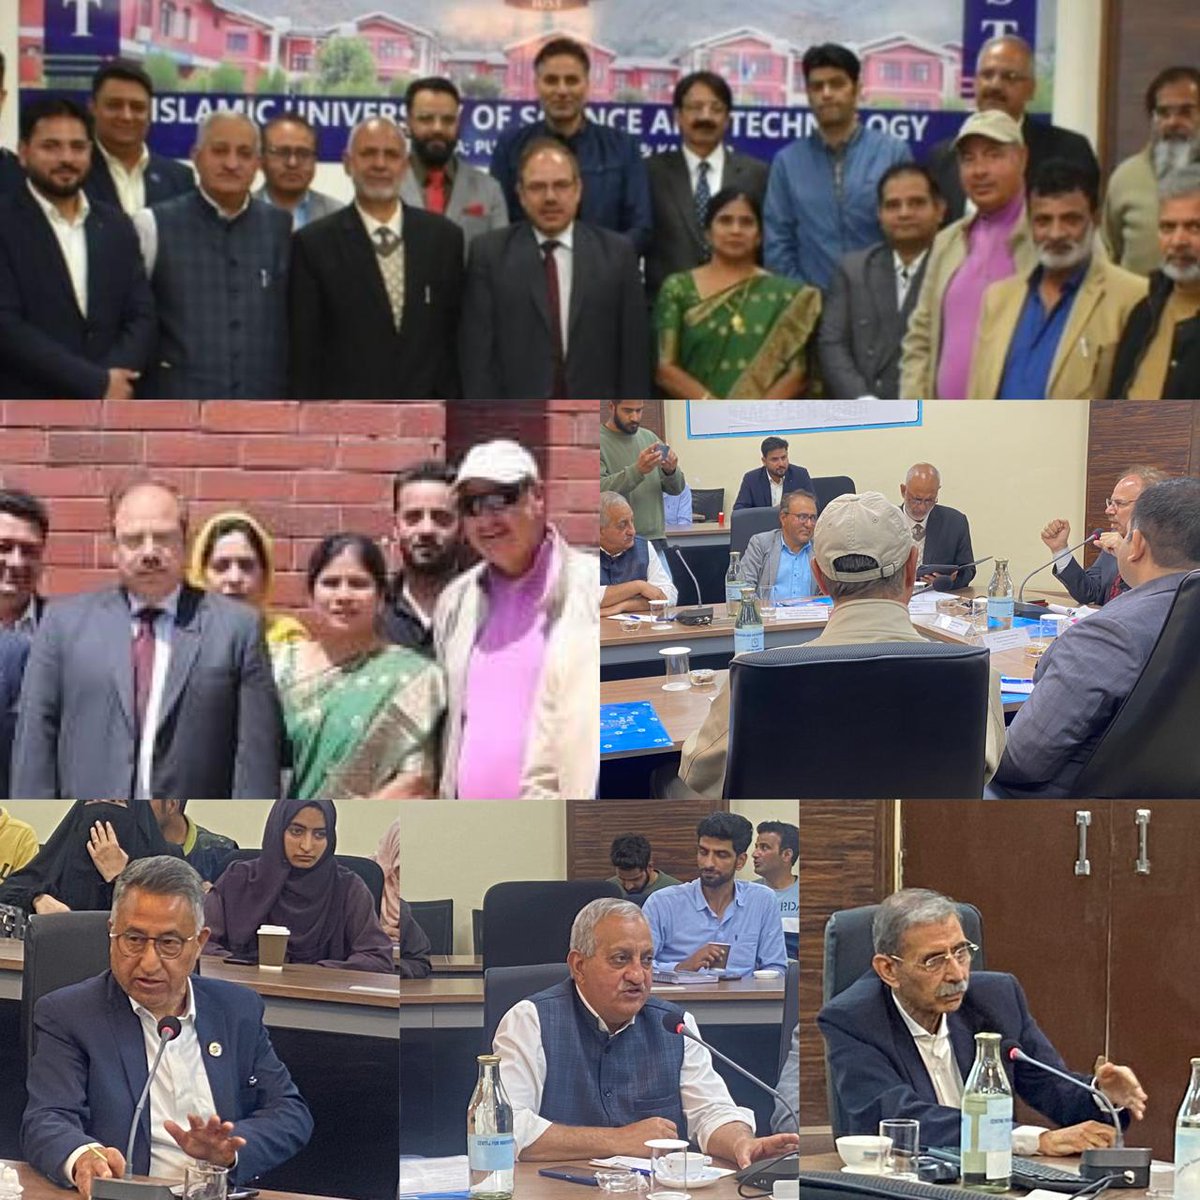 Islamic University of Science & Technology hosts NI-MSME and PHDCCI Kashmir for fruitful discussions on collaboration. Dr. S. Glory Swarupa praises the IUST's dedication to innovation. Participants get insights at the Expert Talk on Investor Awareness with PHDCCI & PARC. #phdcci